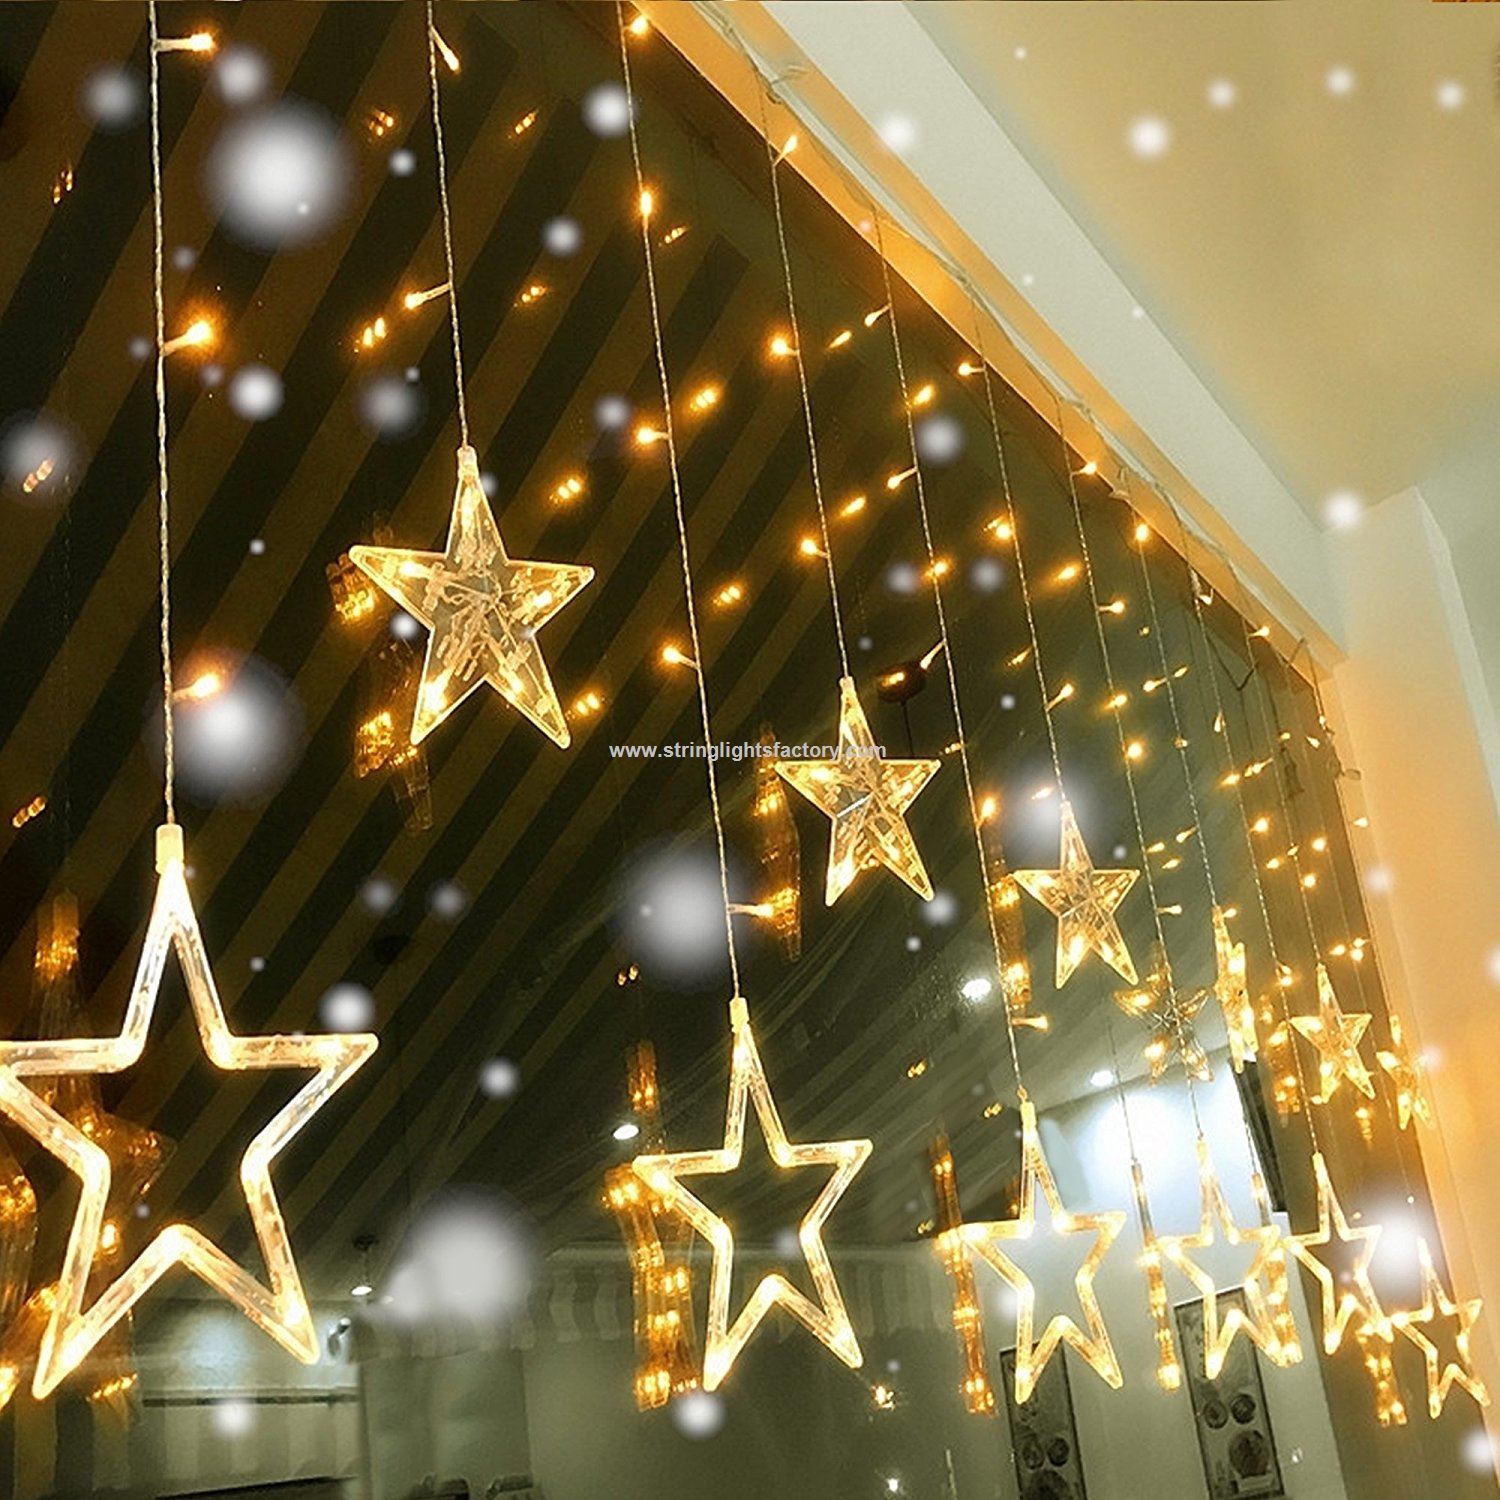 Best Decorations of 138pcs LED Star String Light Holiday Decorative Fairy Lights